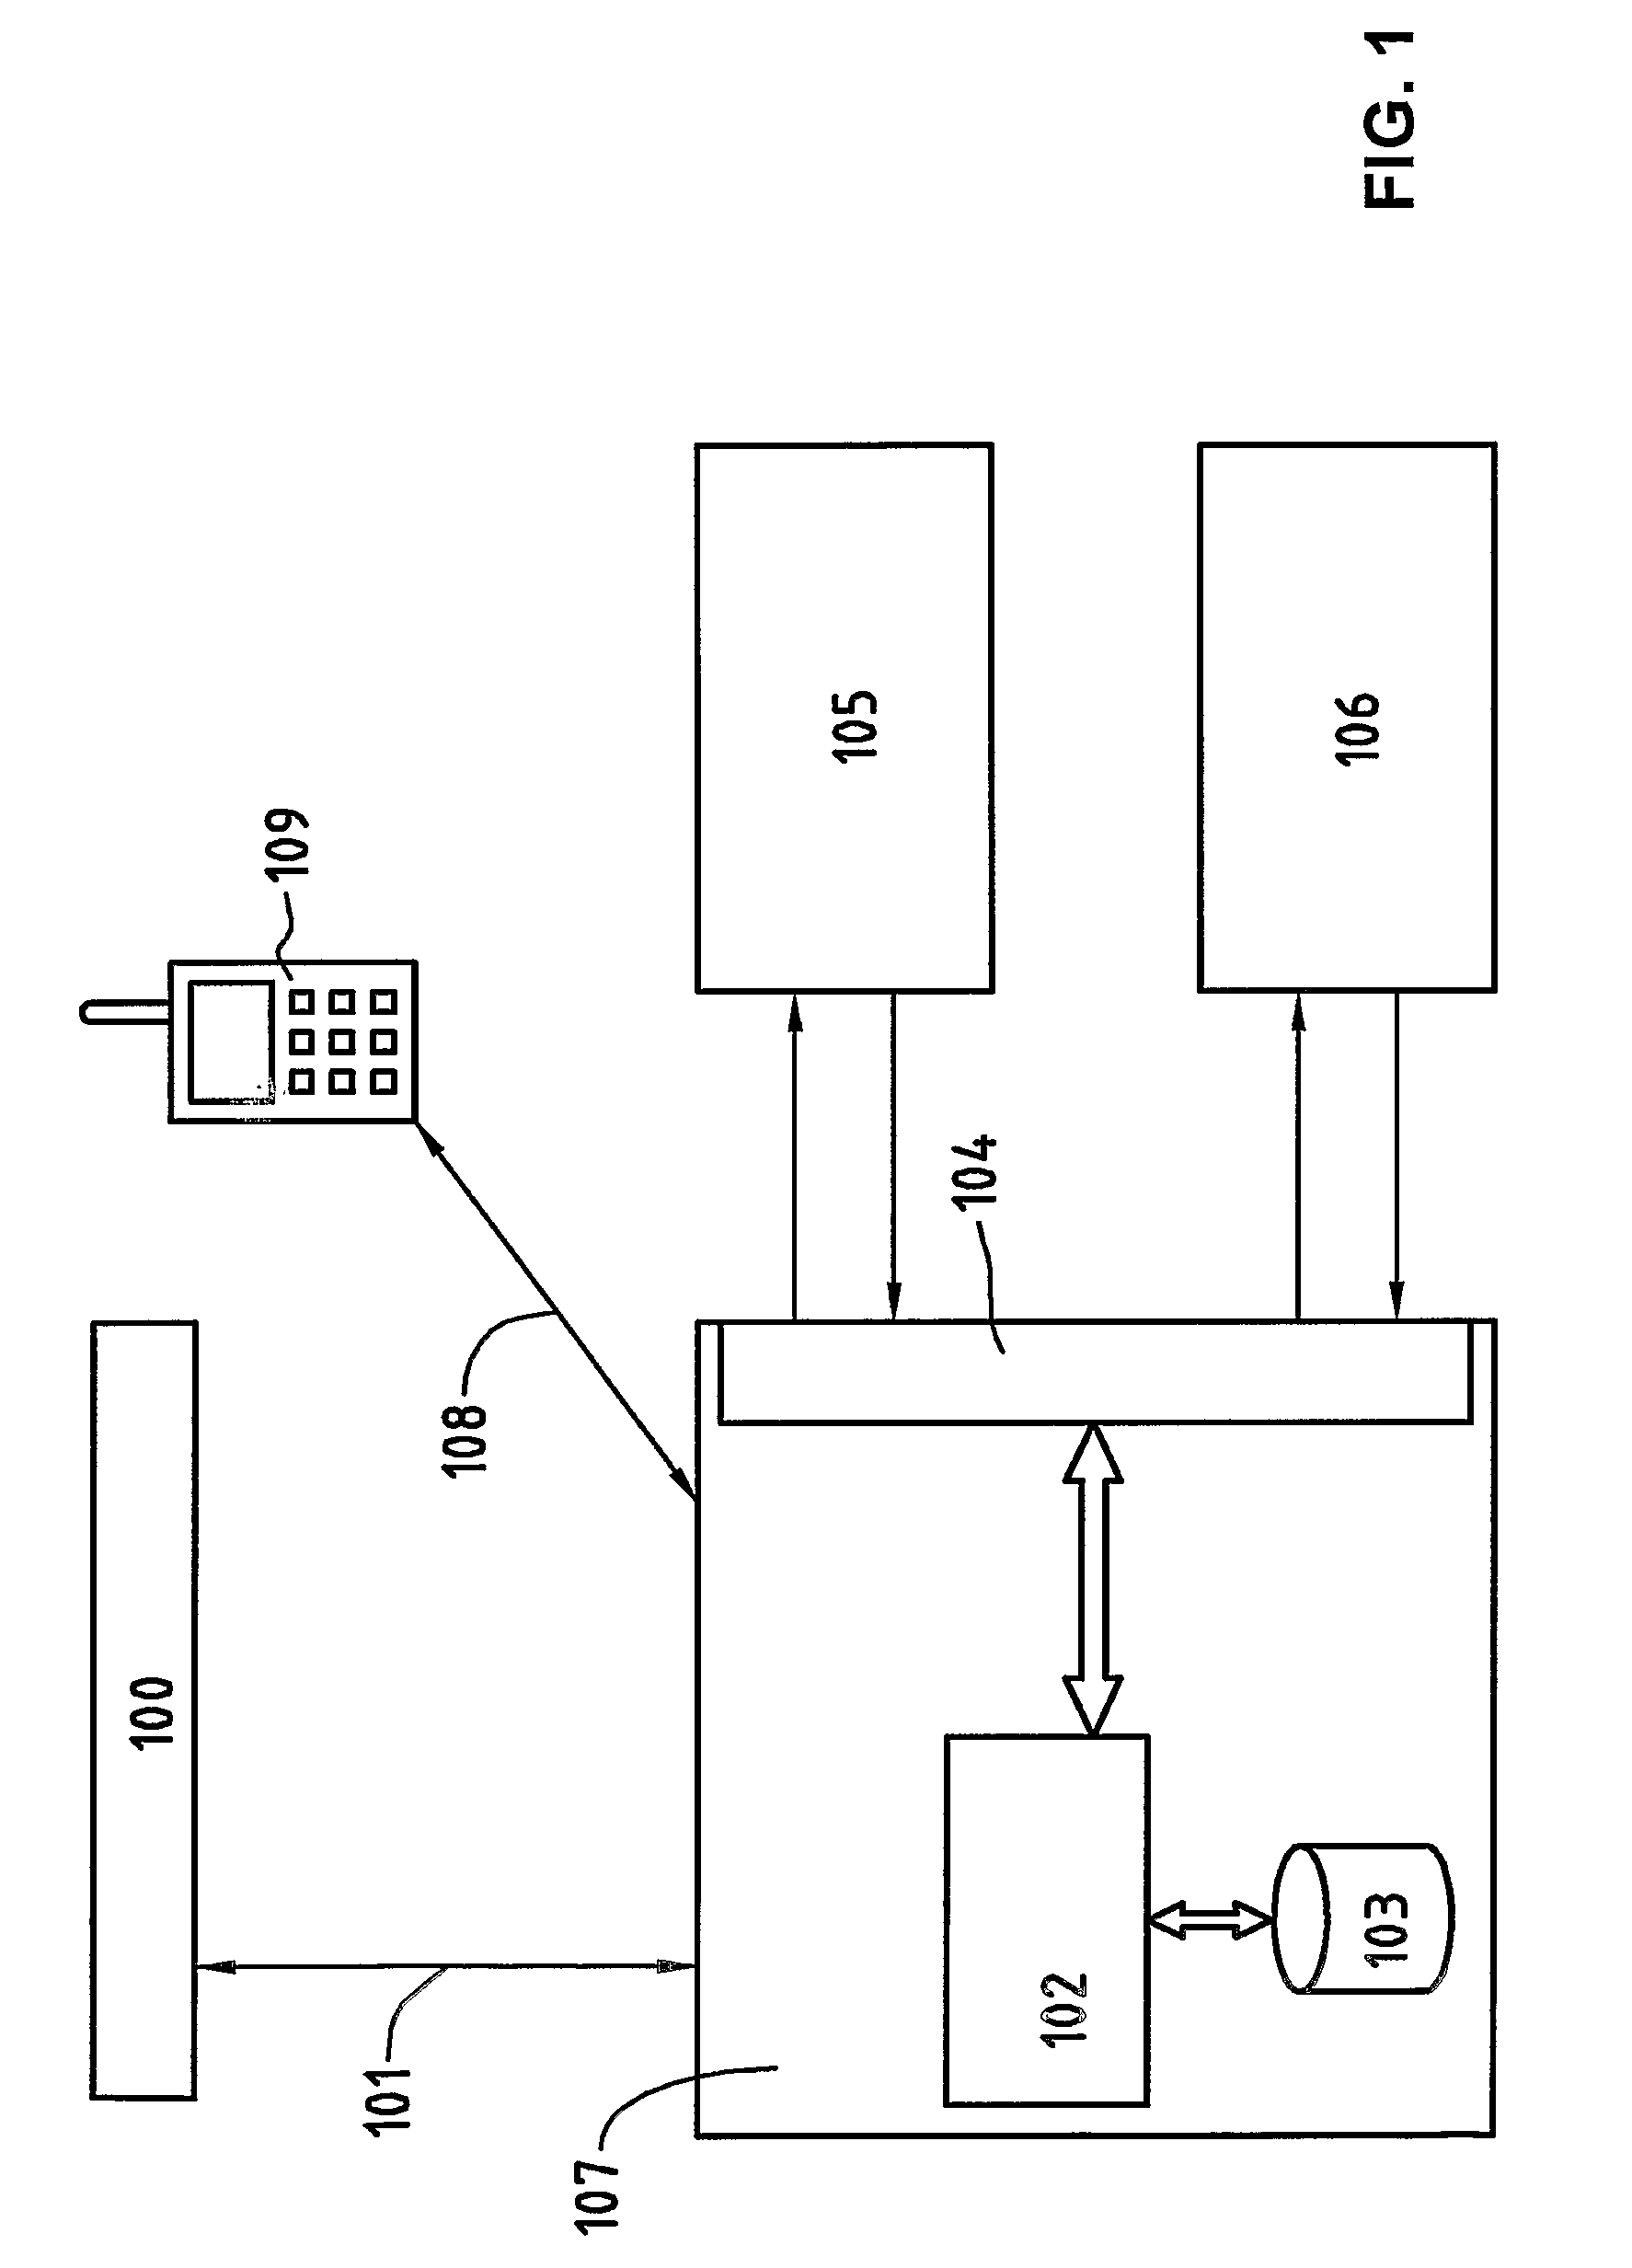 System and Method for Transaction Payment in Multiple Languages and Currencies